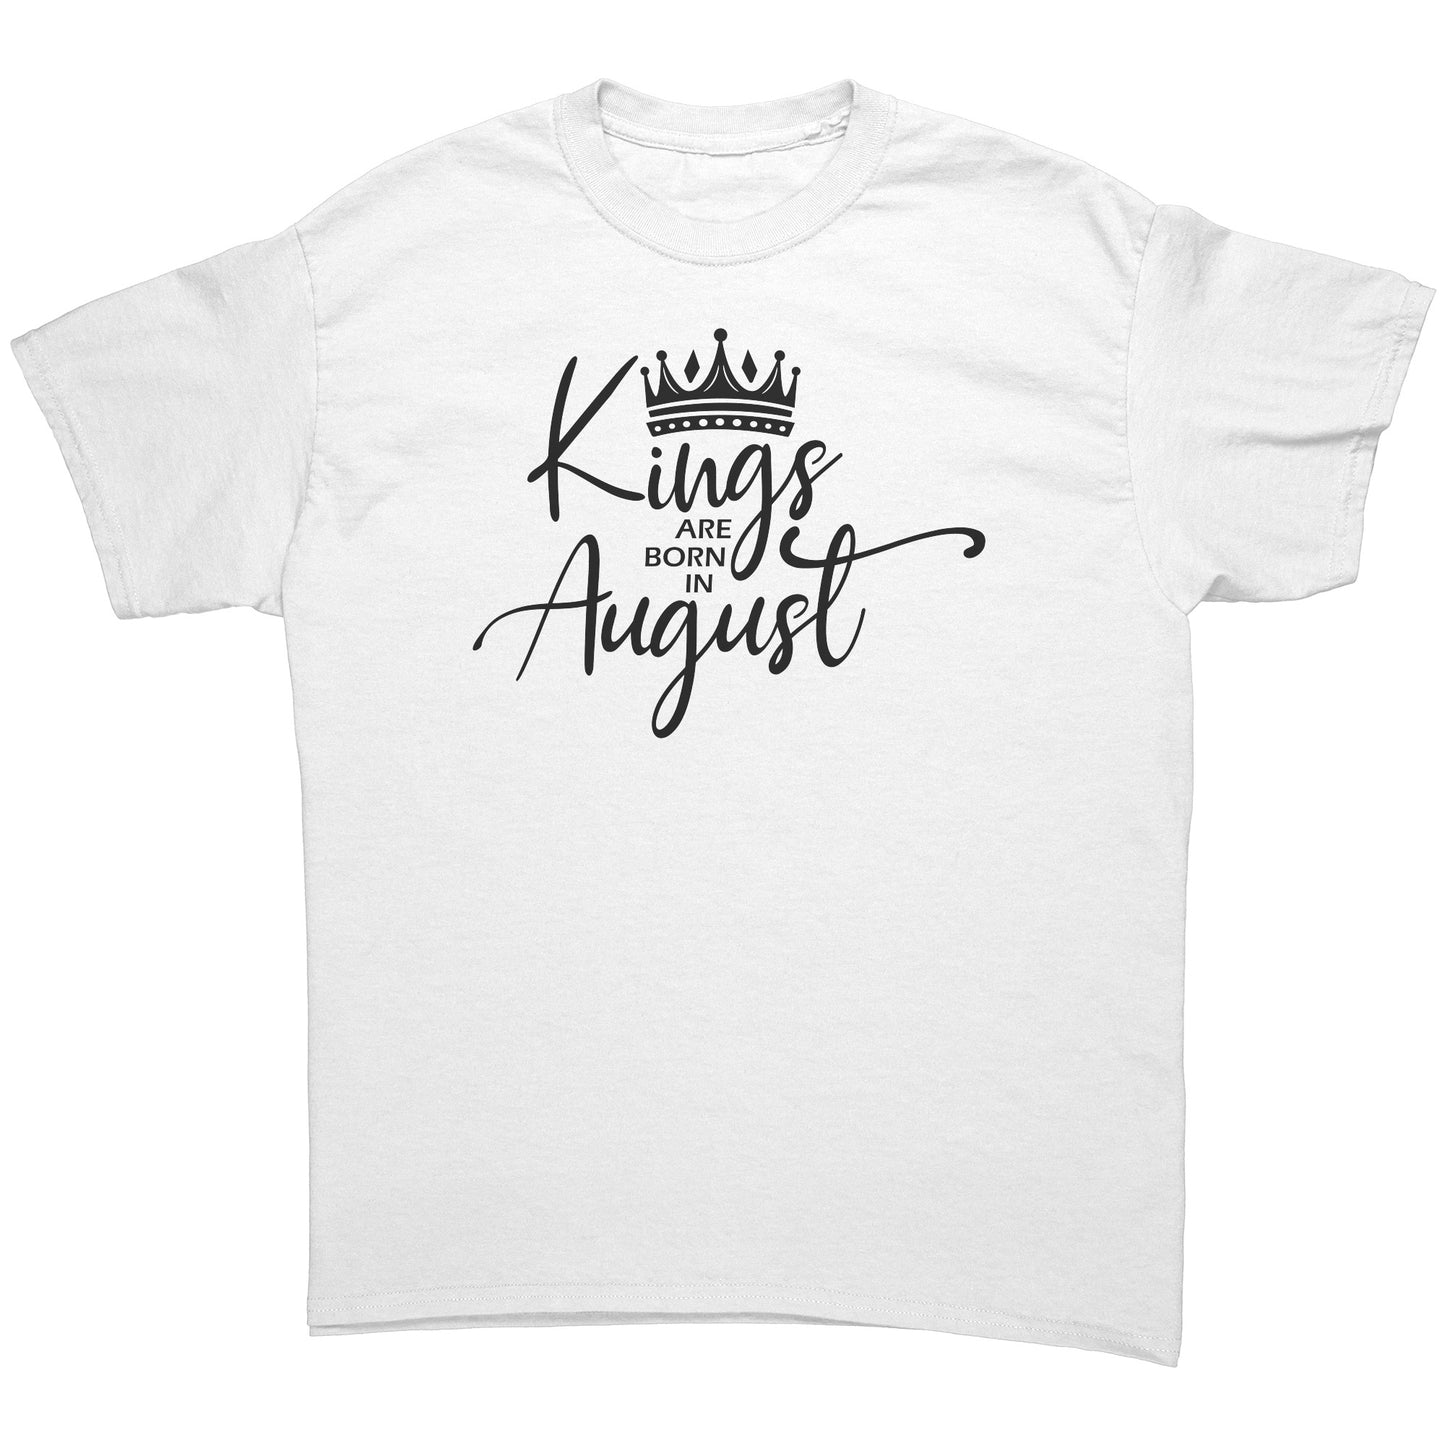 Kings Are Born in August Tee